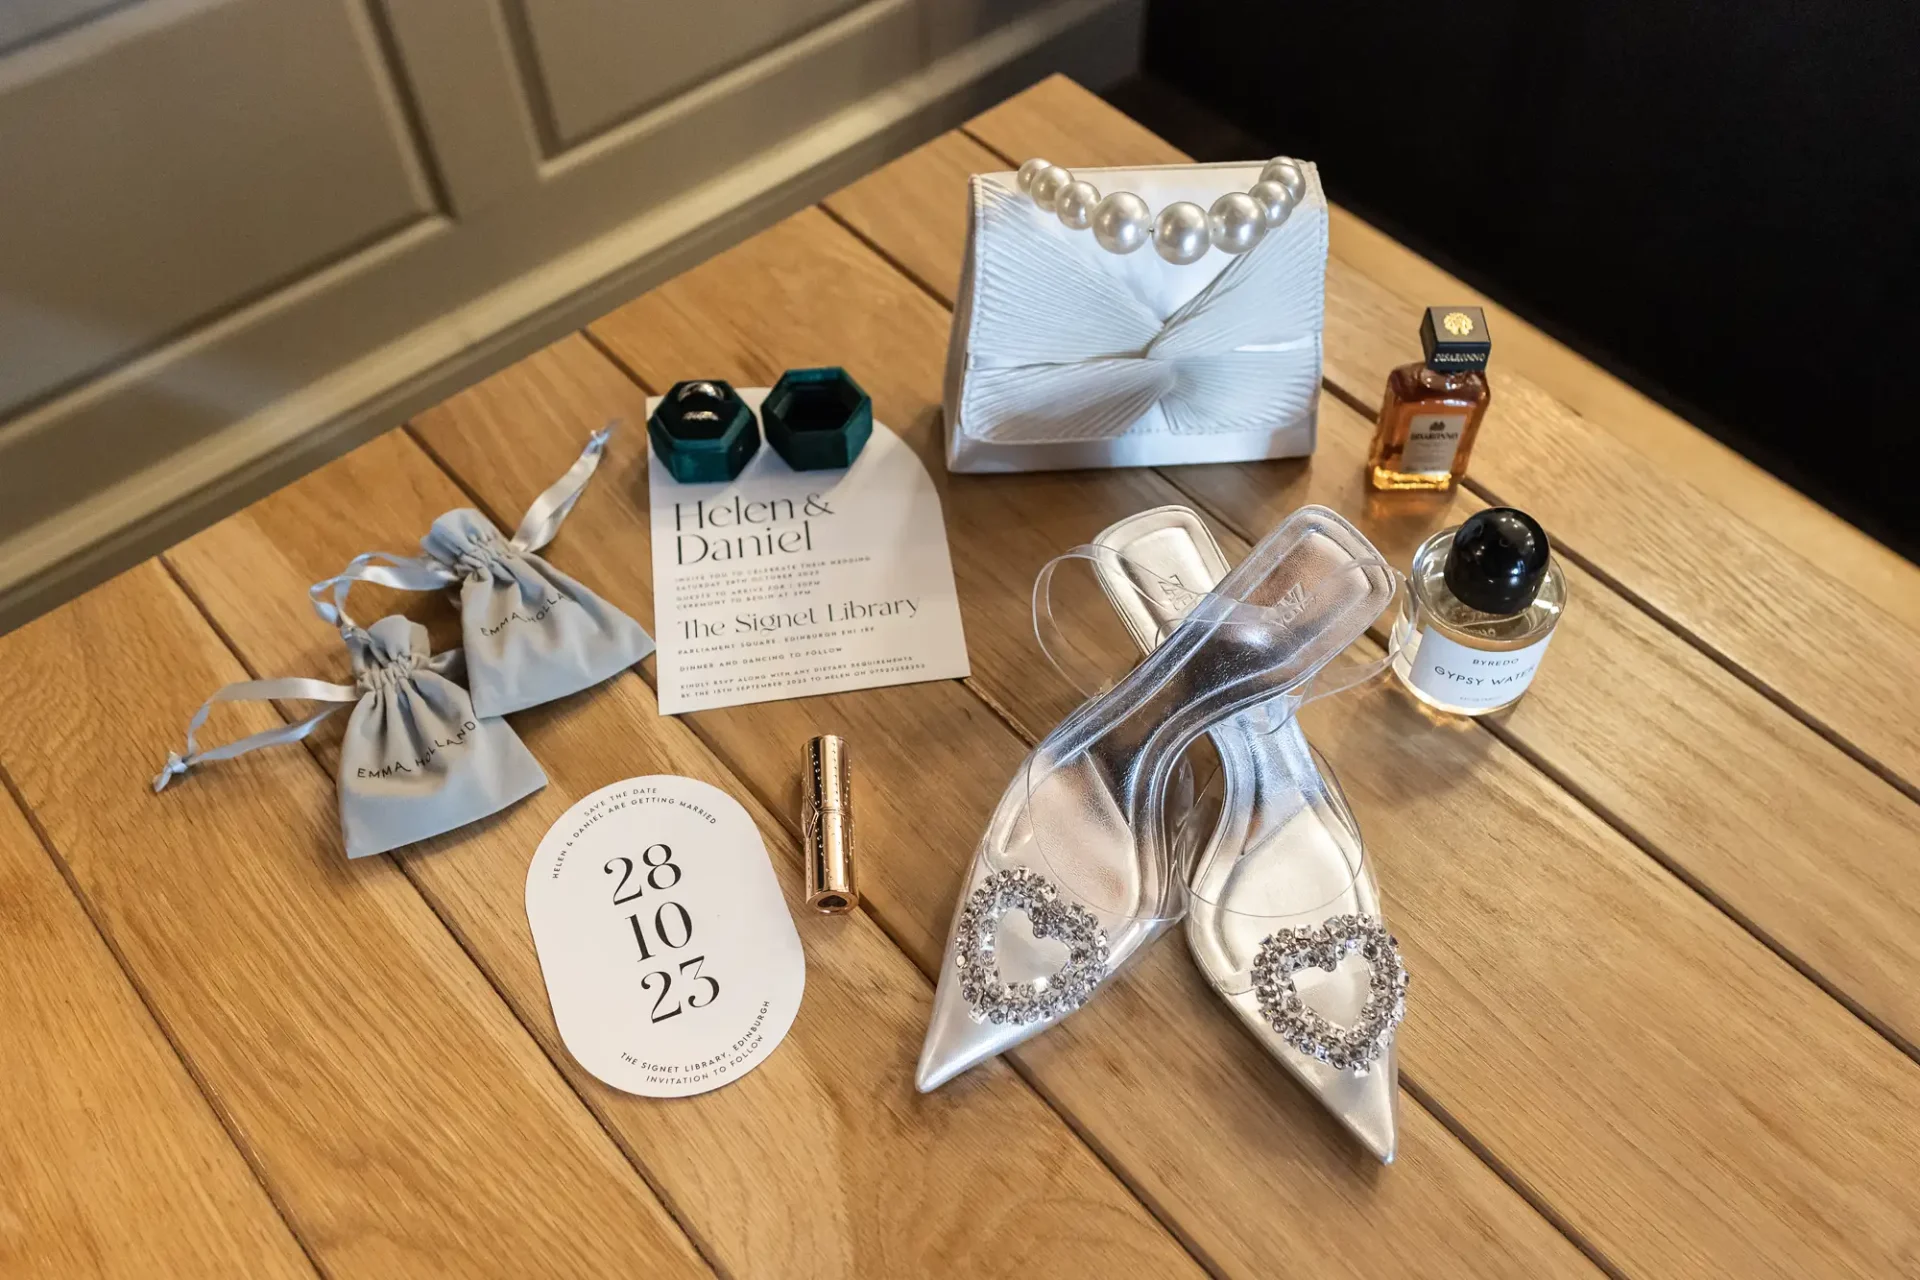 Wedding accessories arranged on a wooden floor, including bridal shoes, perfume bottles, invitation, and pearl clutch.